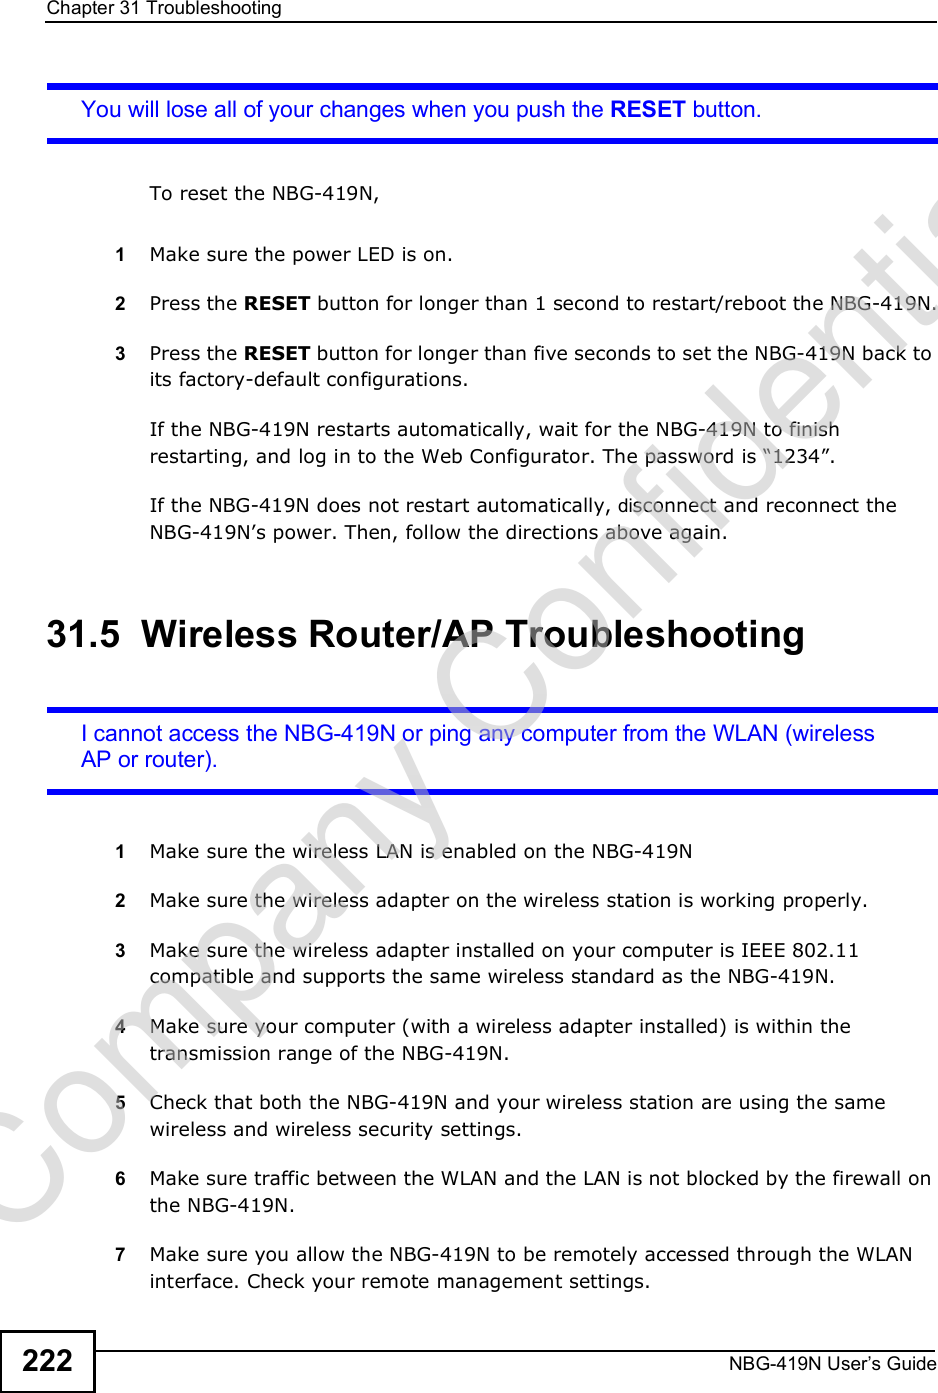 Chapter 31TroubleshootingNBG-419N User s Guide222You will lose all of your changes when you push the RESET button.To reset the NBG-419N,1Make sure the power LED is on.2Press the RESET button for longer than 1 second to restart/reboot the NBG-419N.3Press the RESET button for longer than five seconds to set the NBG-419N back to its factory-default configurations.If the NBG-419N restarts automatically, wait for the NBG-419N to finish restarting, and log in to the Web Configurator. The password is &quot;1234#.If the NBG-419N does not restart automatically, disconnect and reconnect the NBG-419N!s power. Then, follow the directions above again.31.5  Wireless Router/AP TroubleshootingI cannot access the NBG-419N or ping any computer from the WLAN (wireless AP or router).1Make sure the wireless LAN is enabled on the NBG-419N2Make sure the wireless adapter on the wireless station is working properly.3Make sure the wireless adapter installed on your computer is IEEE 802.11 compatible and supports the same wireless standard as the NBG-419N.4Make sure your computer (with a wireless adapter installed) is within the transmission range of the NBG-419N.5Check that both the NBG-419N and your wireless station are using the same wireless and wireless security settings.6Make sure traffic between the WLAN and the LAN is not blocked by the firewall on the NBG-419N. 7Make sure you allow the NBG-419N to be remotely accessed through the WLAN interface. Check your remote management settings.Company Confidential